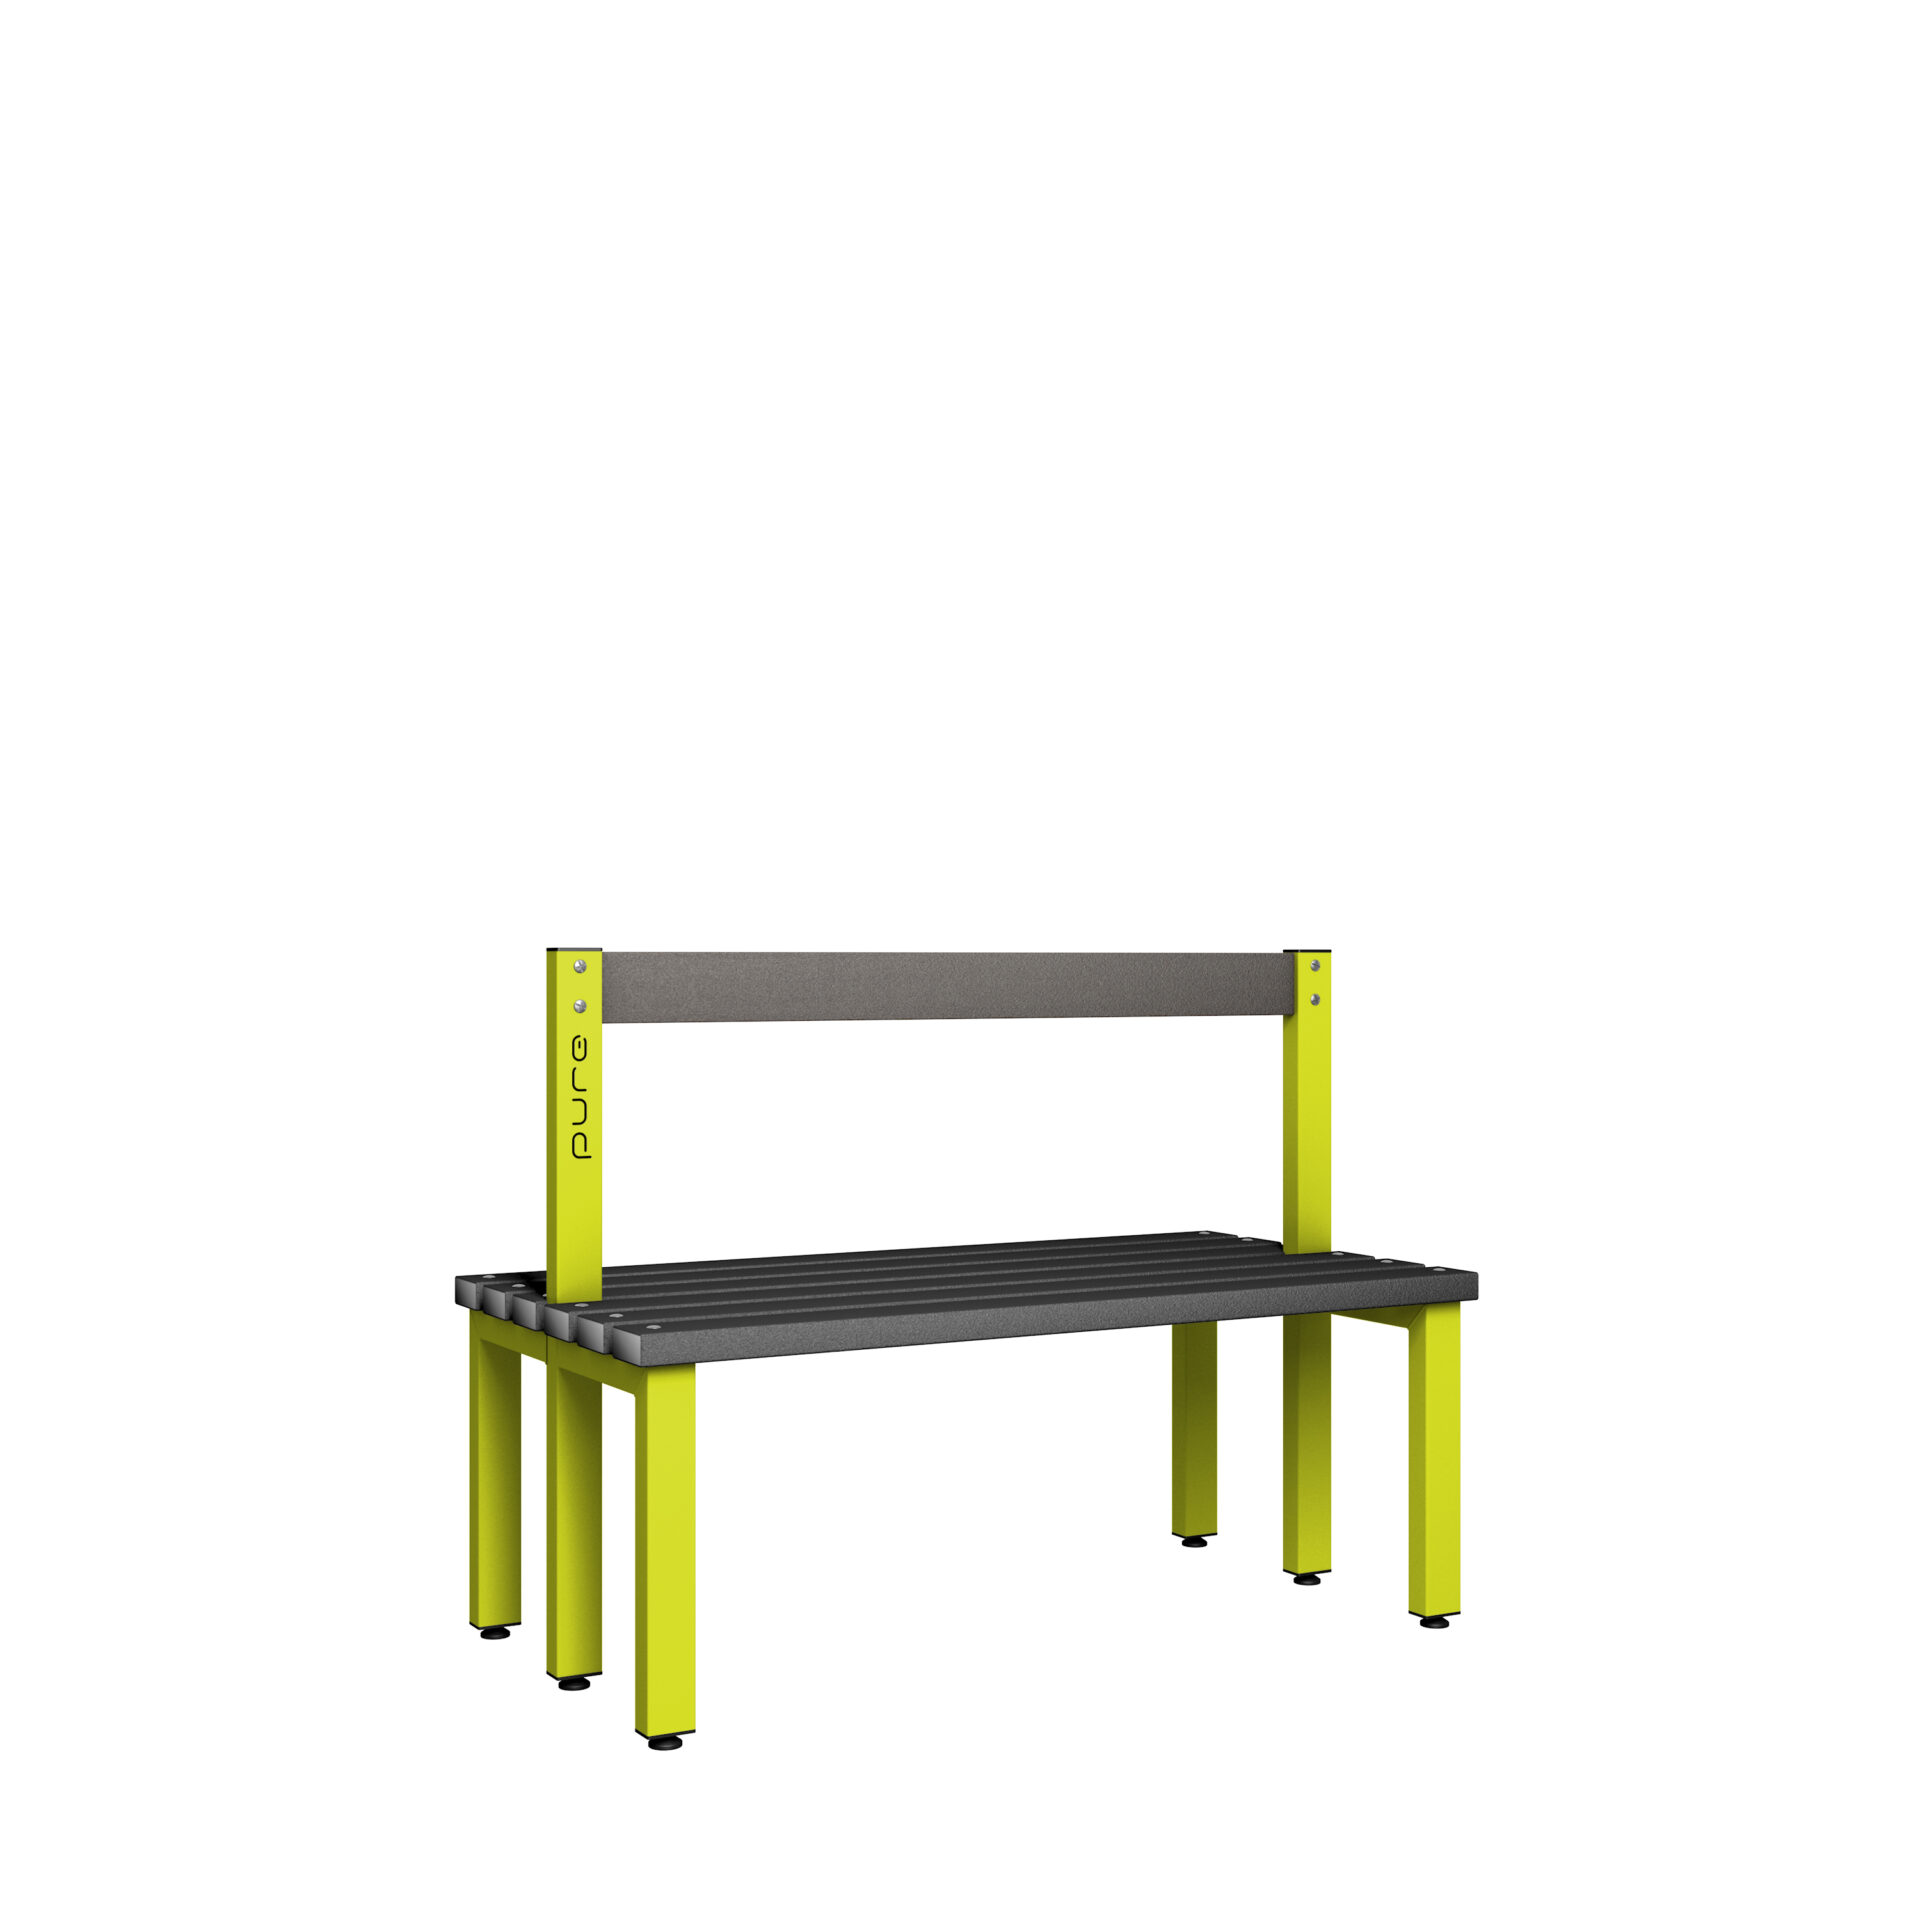 Pure Carbon Zero Double Sided 1200mm Low Height Back Rest Bench